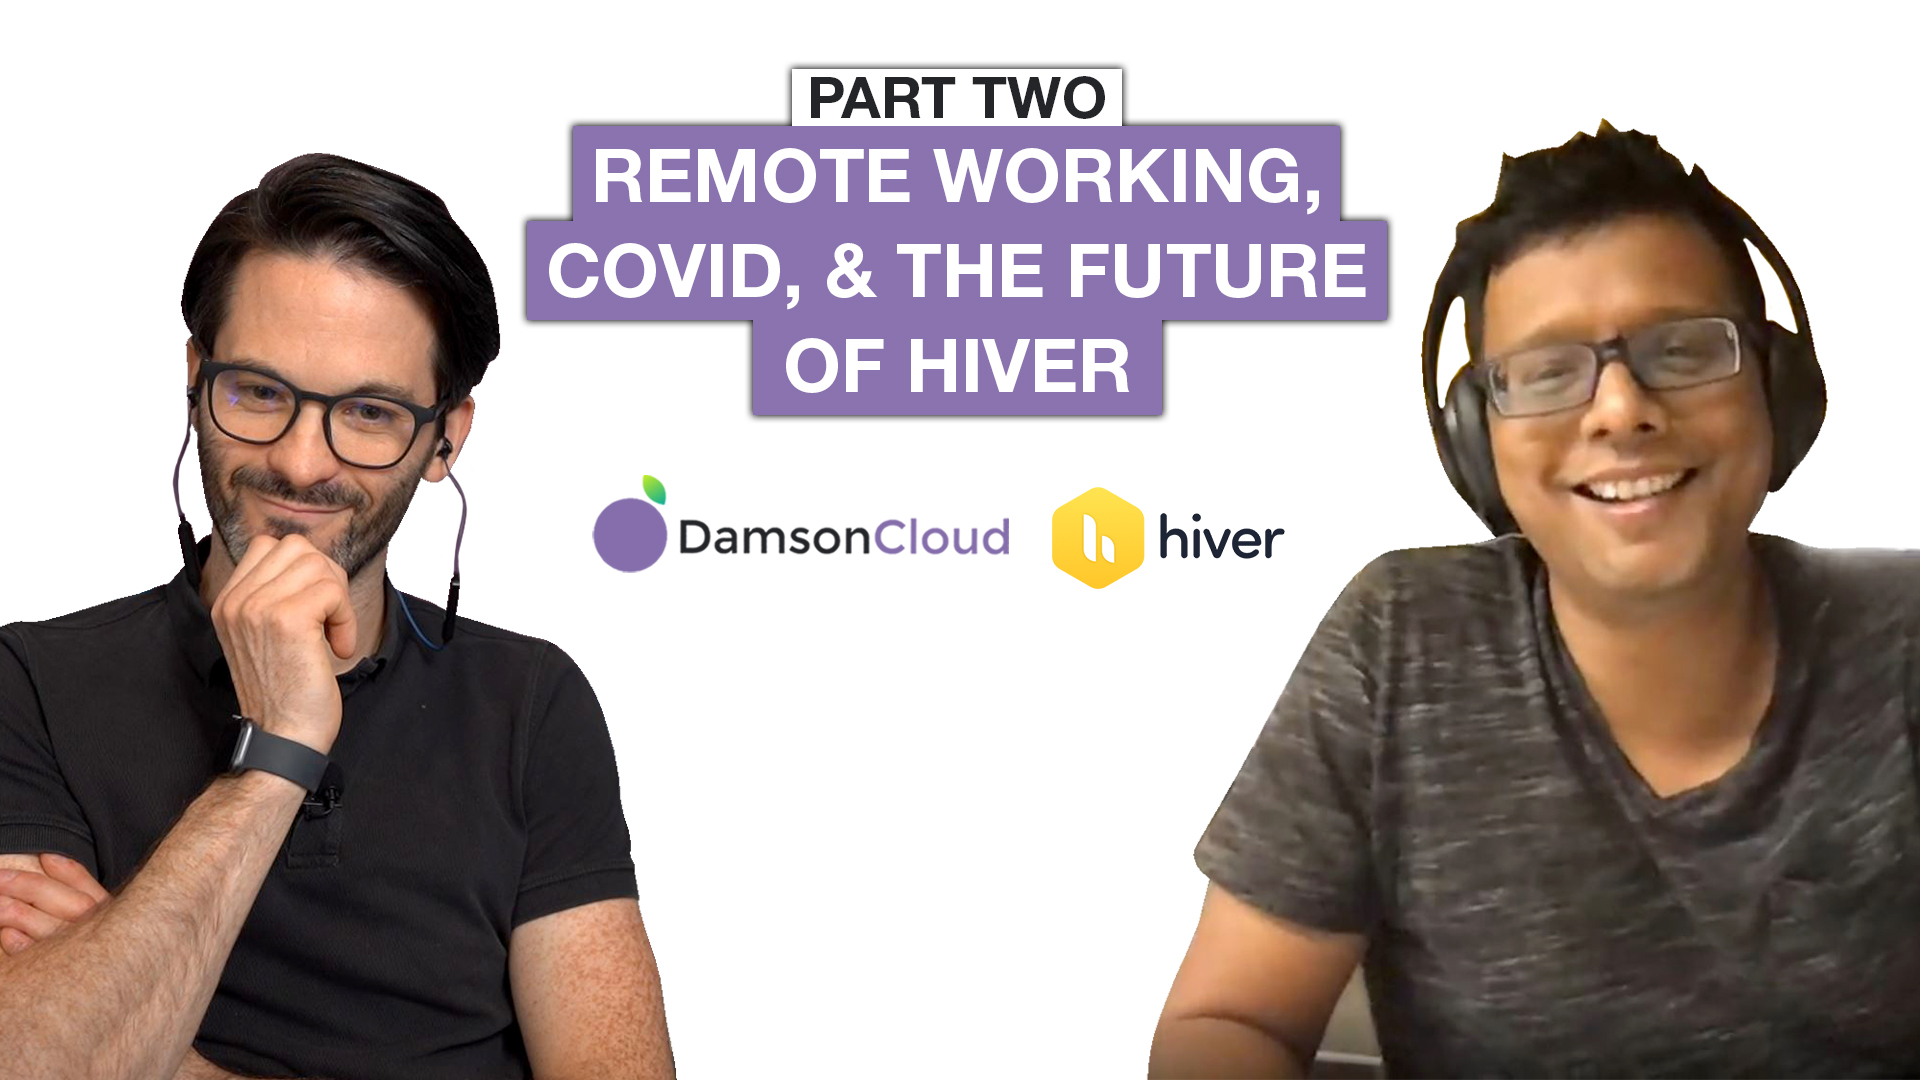 Remote Working, Covid, and the Future of Hiver